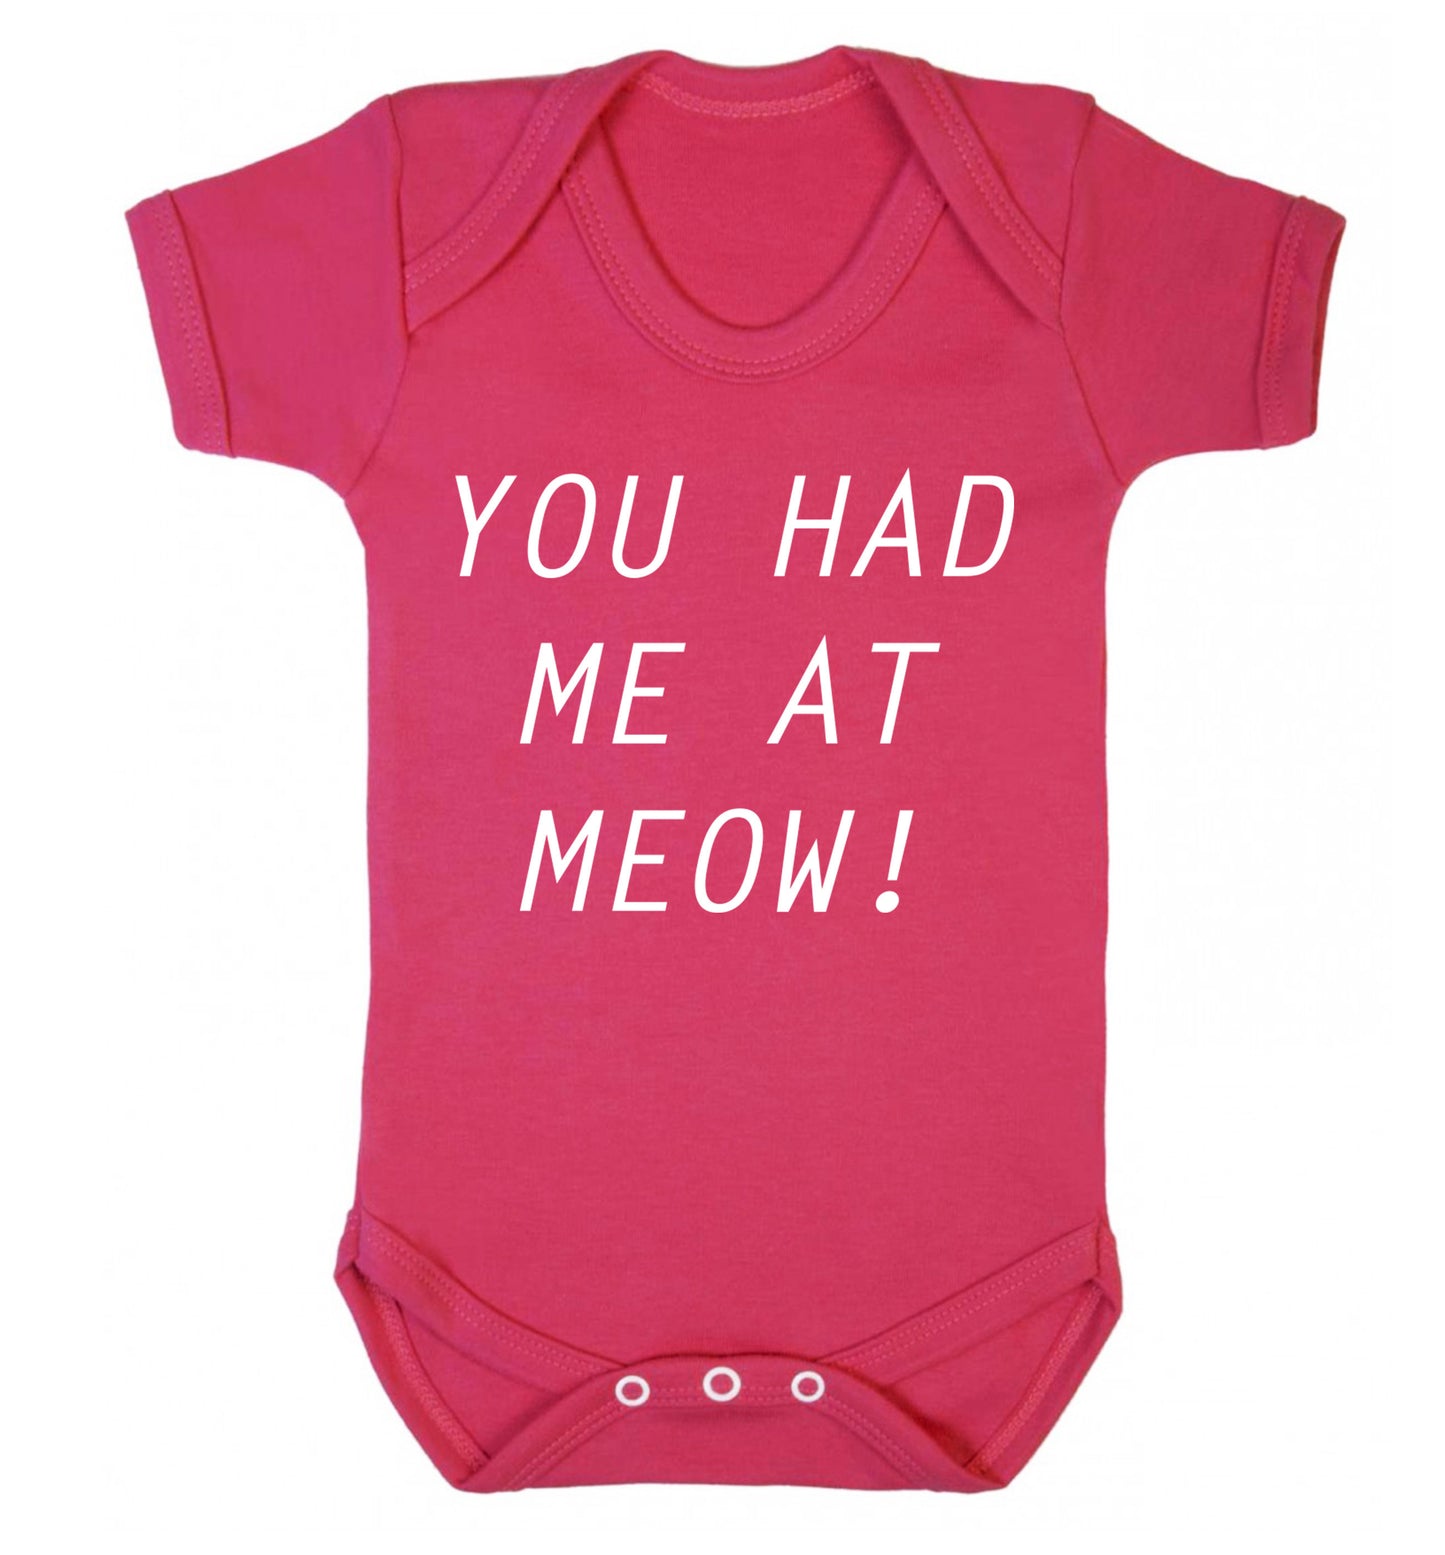 You had me at meow Baby Vest dark pink 18-24 months